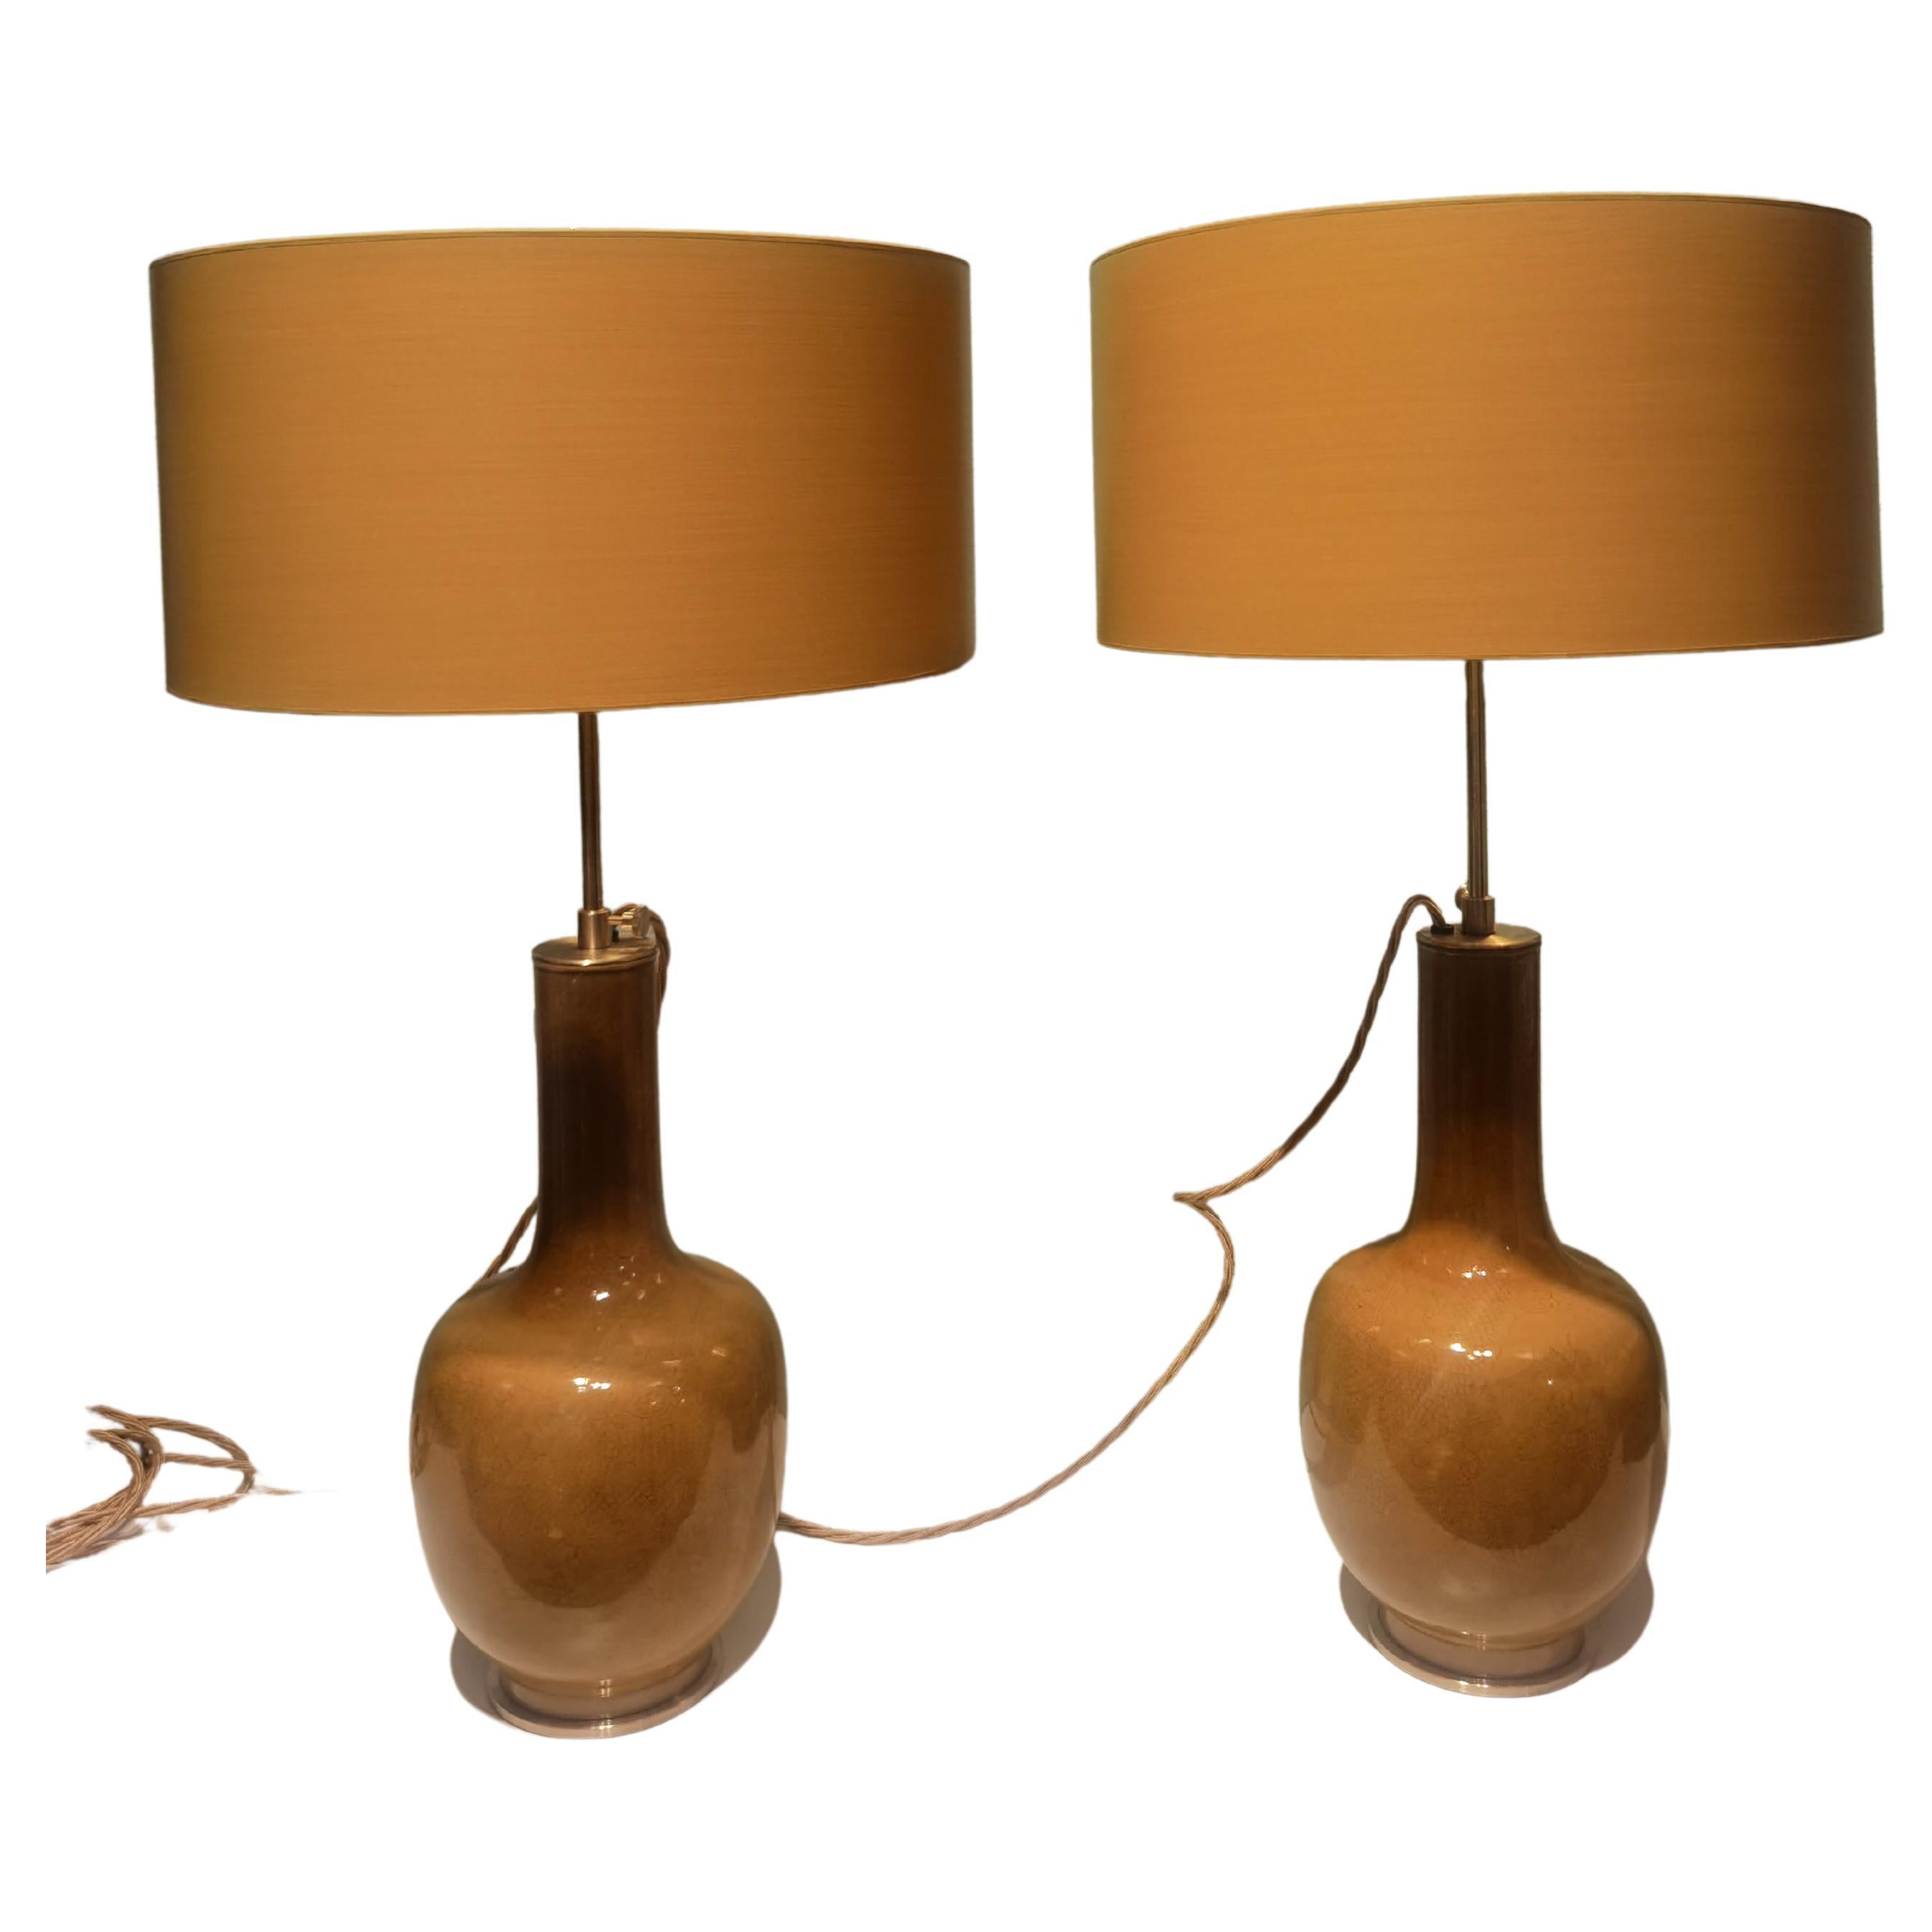 Pair of chinoiserie table lamps made from a pair of ochre glazed porcelain bottle vases from the early 20th century. Transformed to table lamps with solid brass ends by Sofina Boutique Kitzbühel with a handmade and handpainted lampshade in ochre.